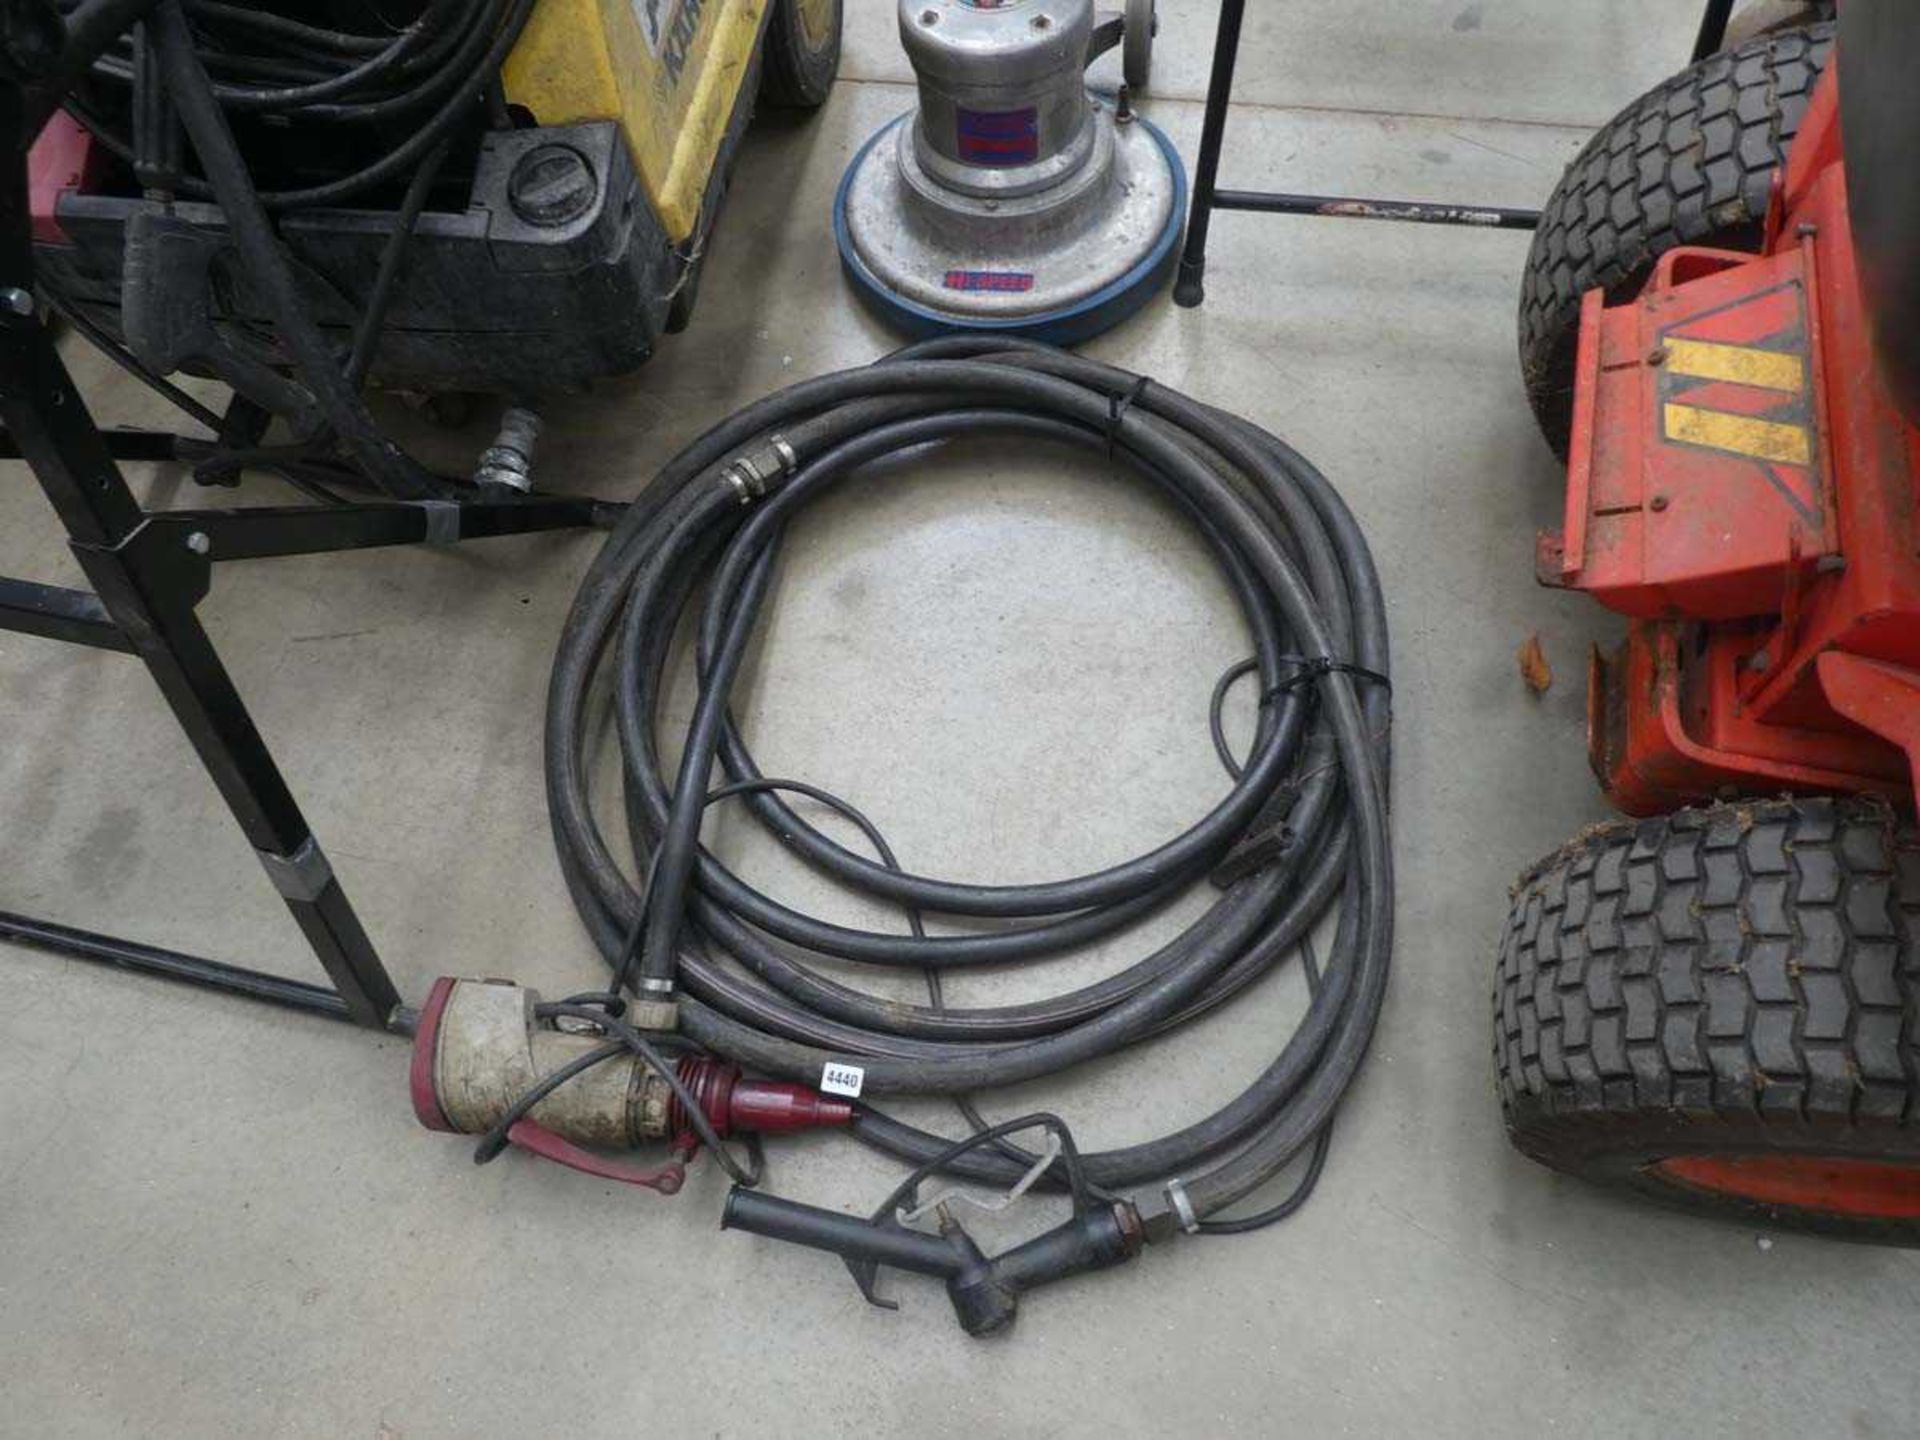 Roll of black air hose with spray attachment